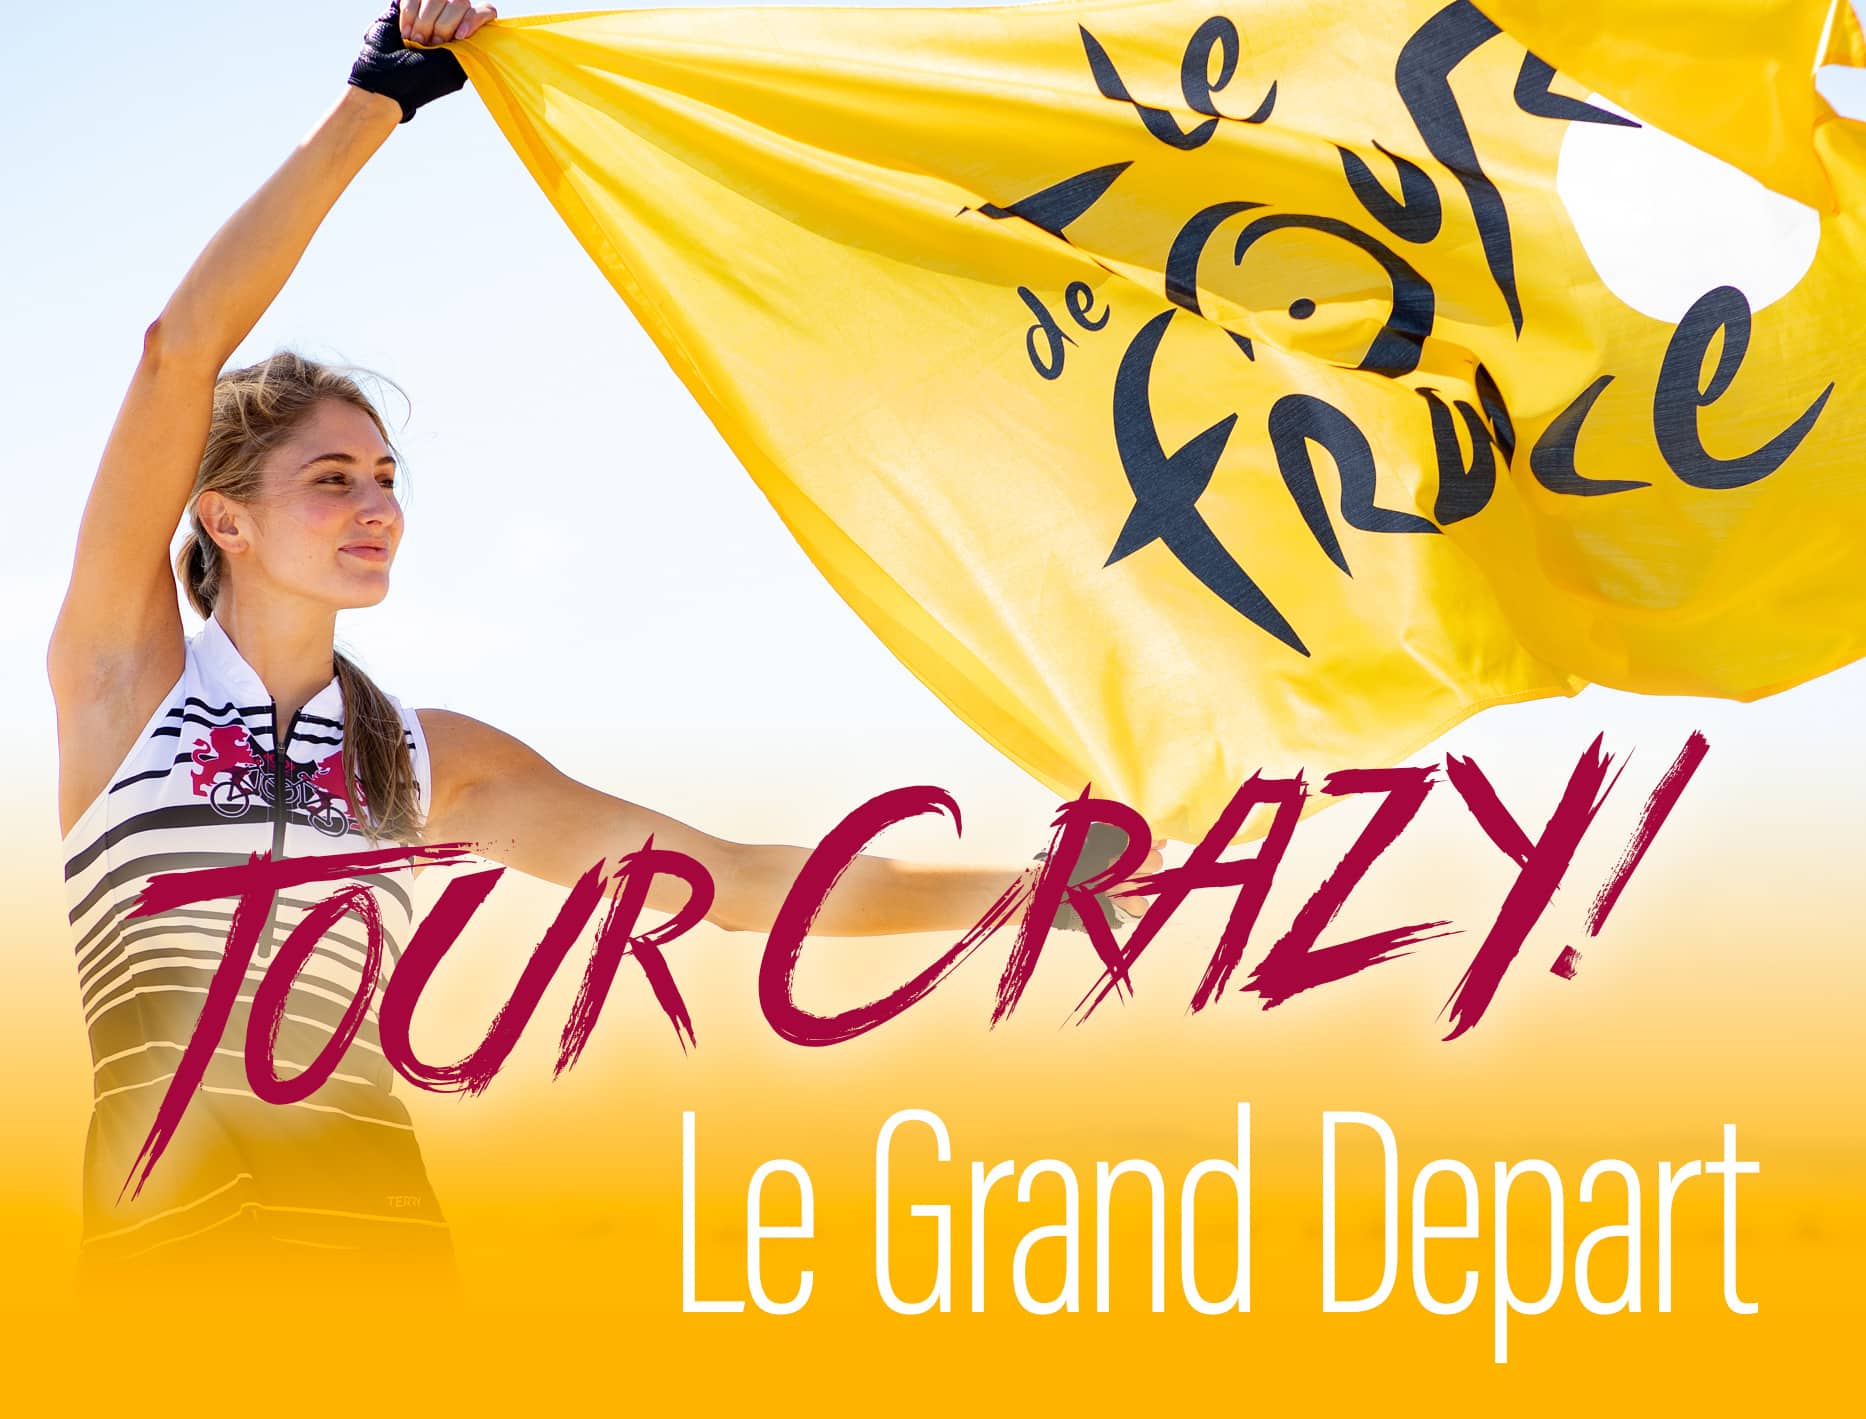 Photo montage showing a model wearing a Terry sleeveless cycling jersey from the limited edition Tour de France 2019 collection, holding a bright yellow Tour de France flag, and showing Test: Tour Crazy – Le Grand Depart